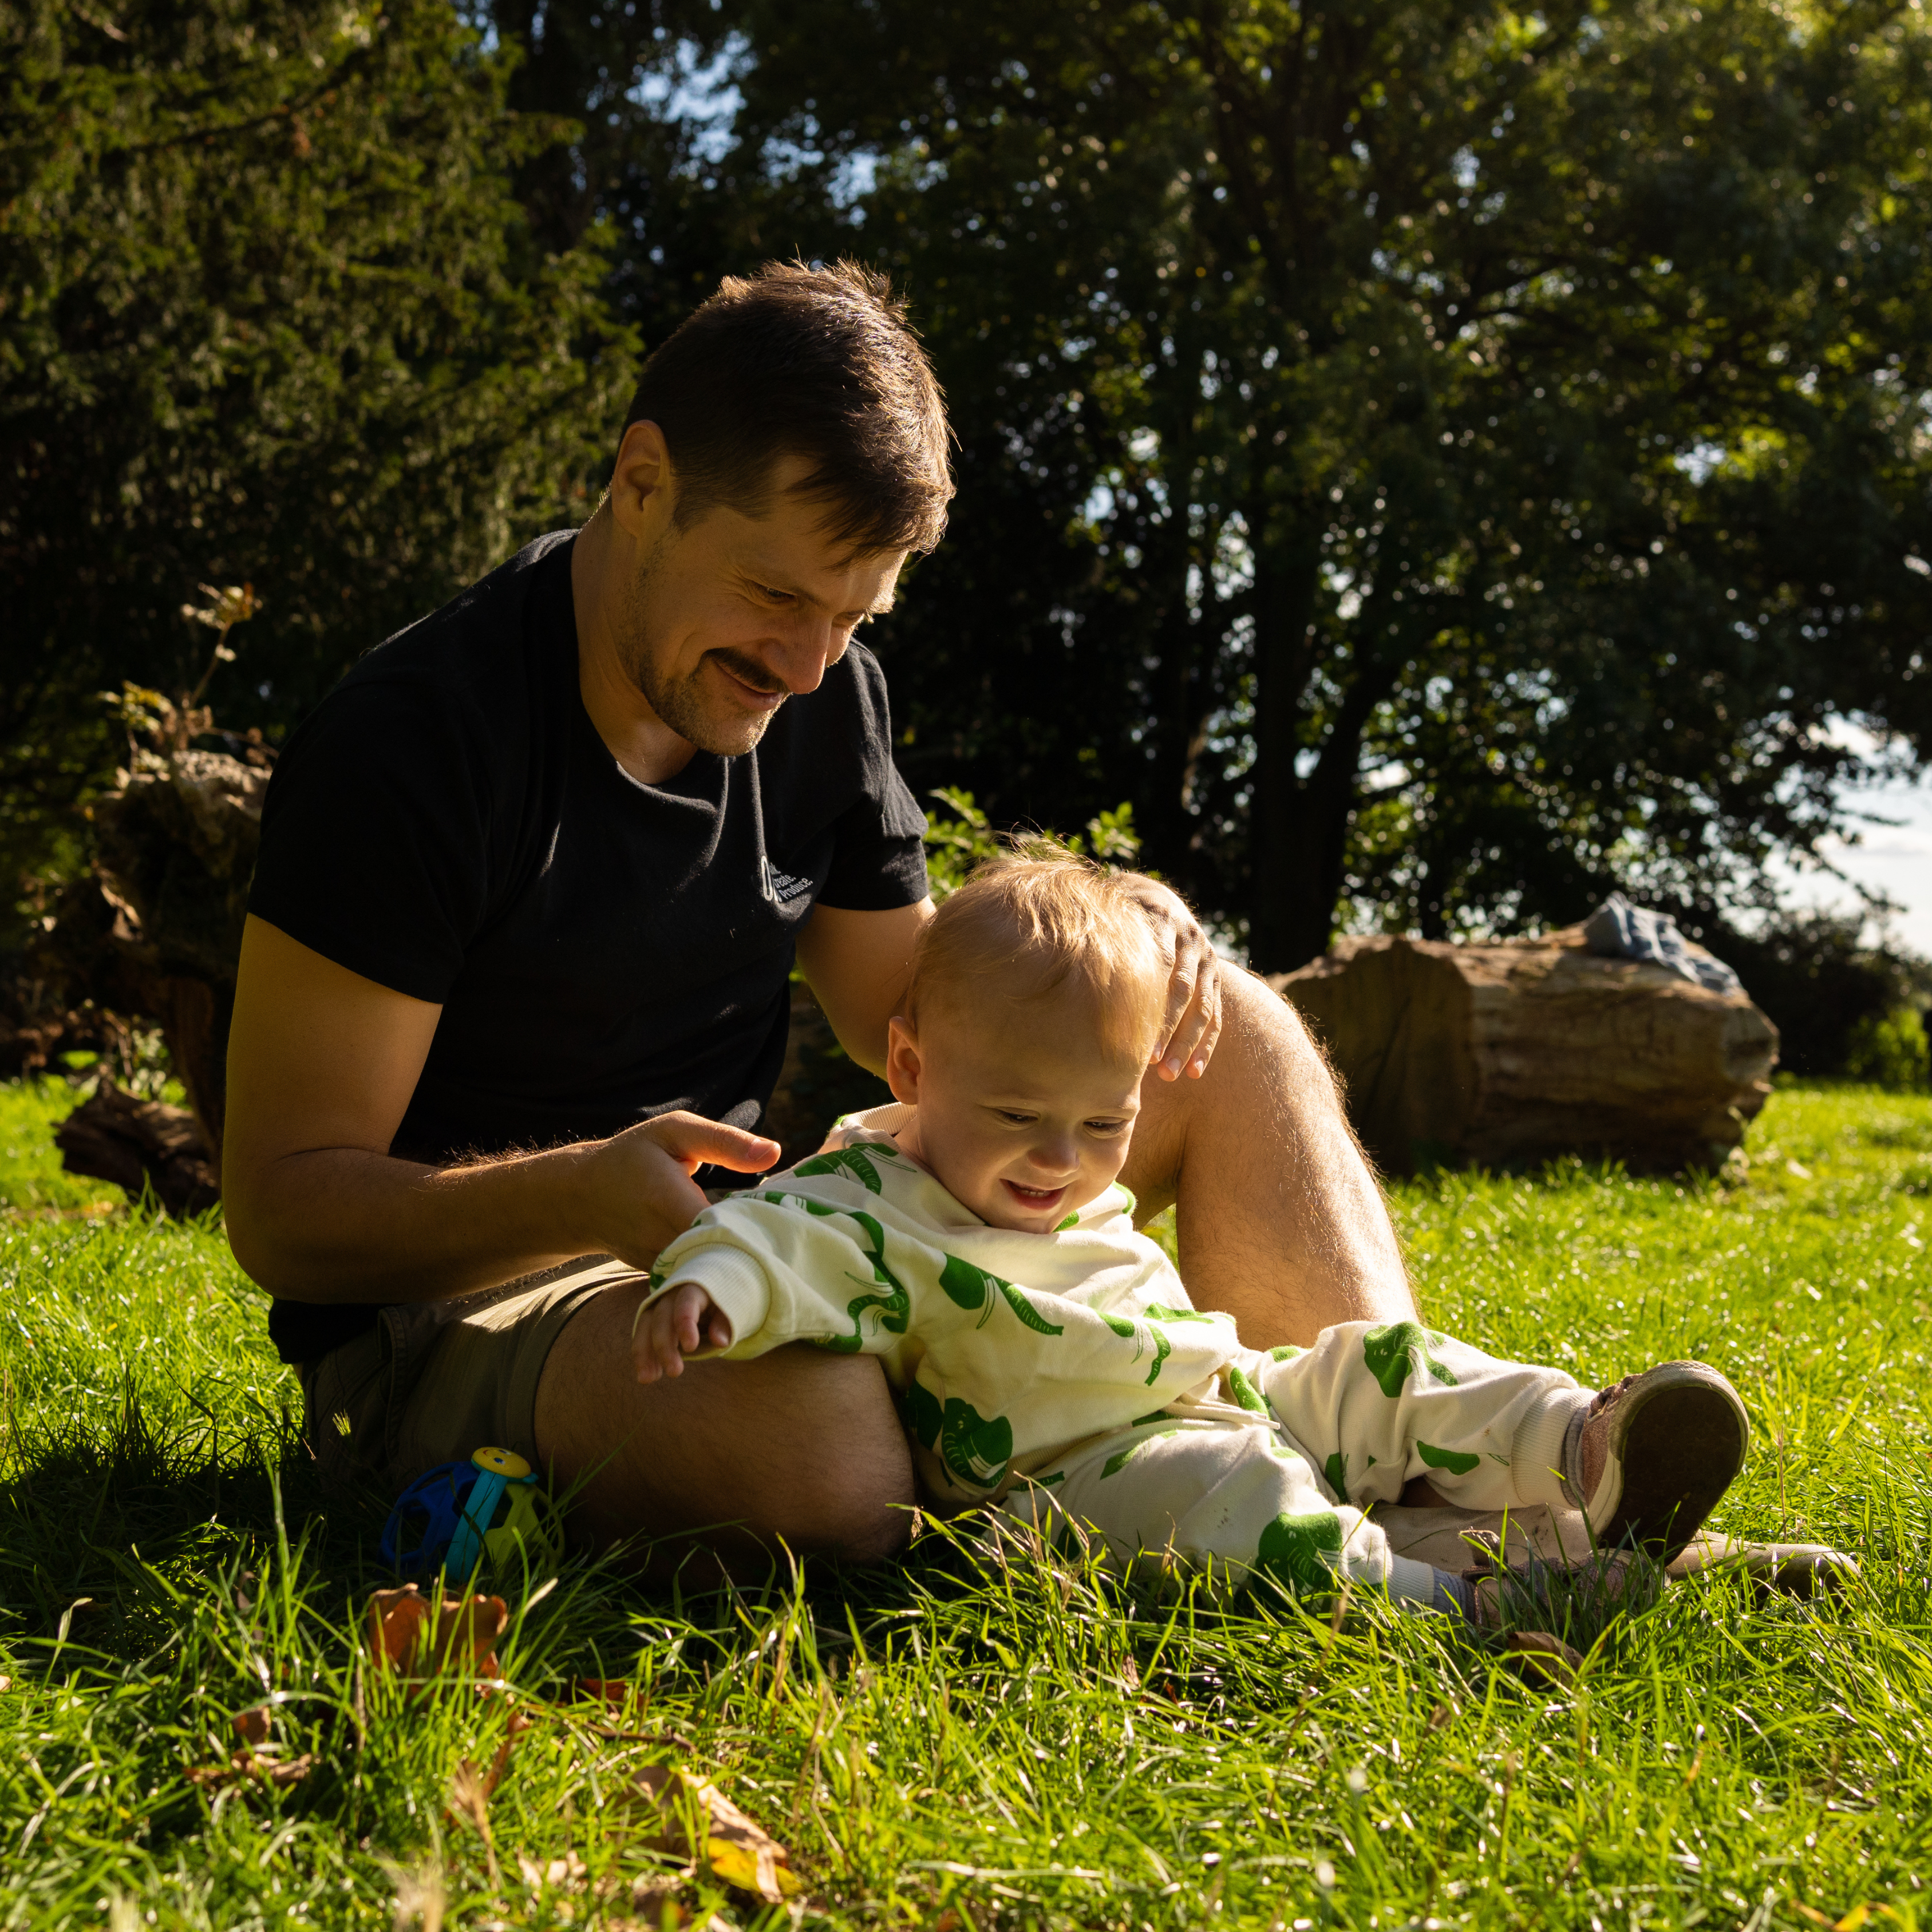 Baby sat in the grass with dad in rented baby clothes - rent baby clothes